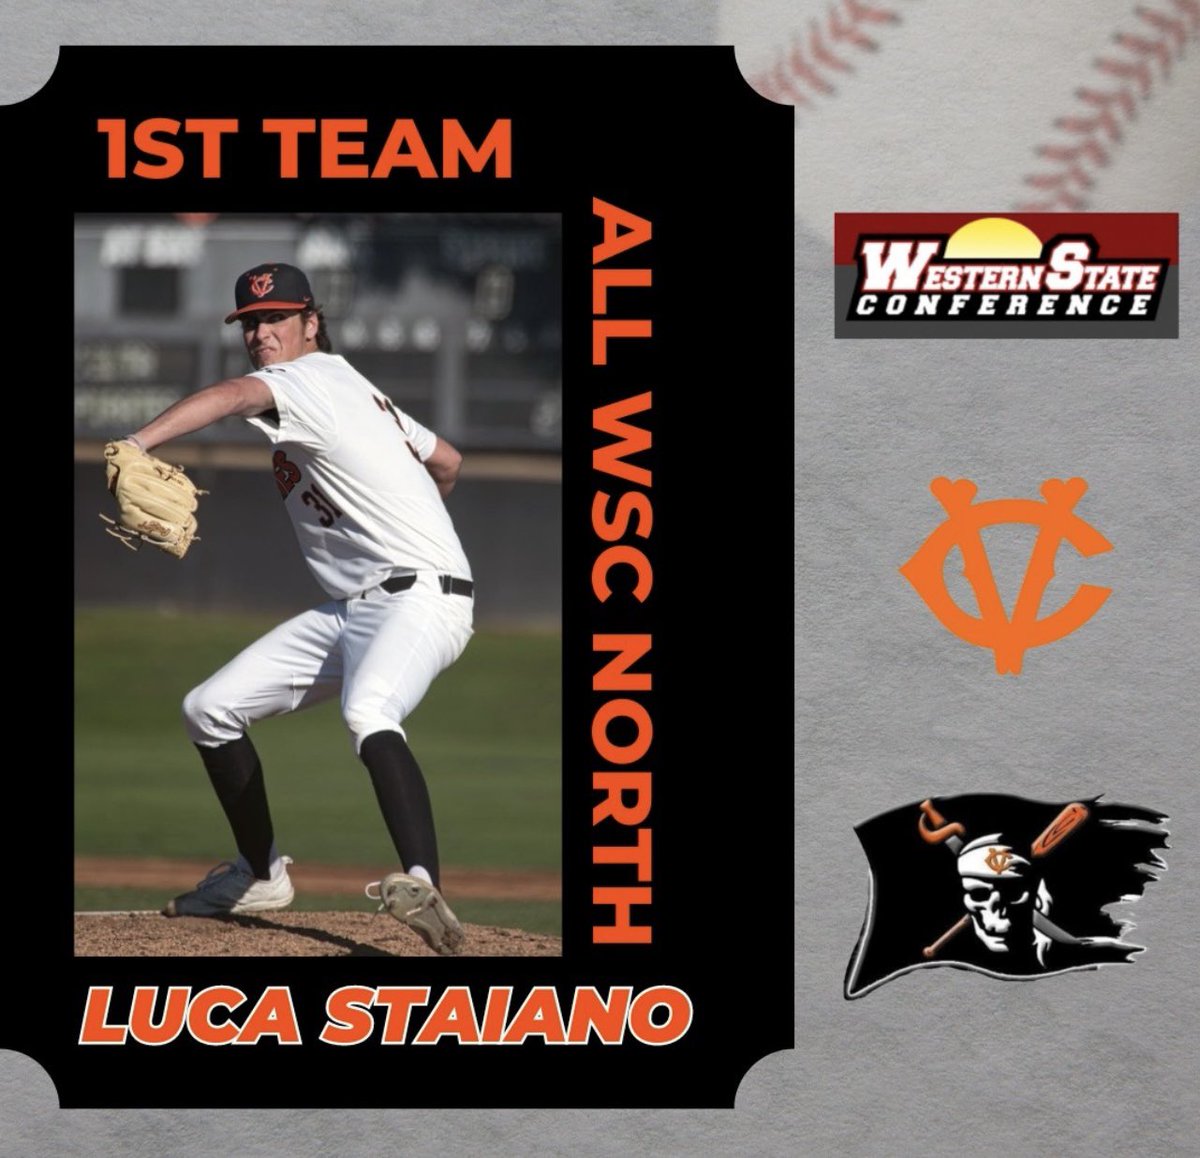 Congratulations to Lucas Staiano on earning  1st Team All-Western State Conference this season.